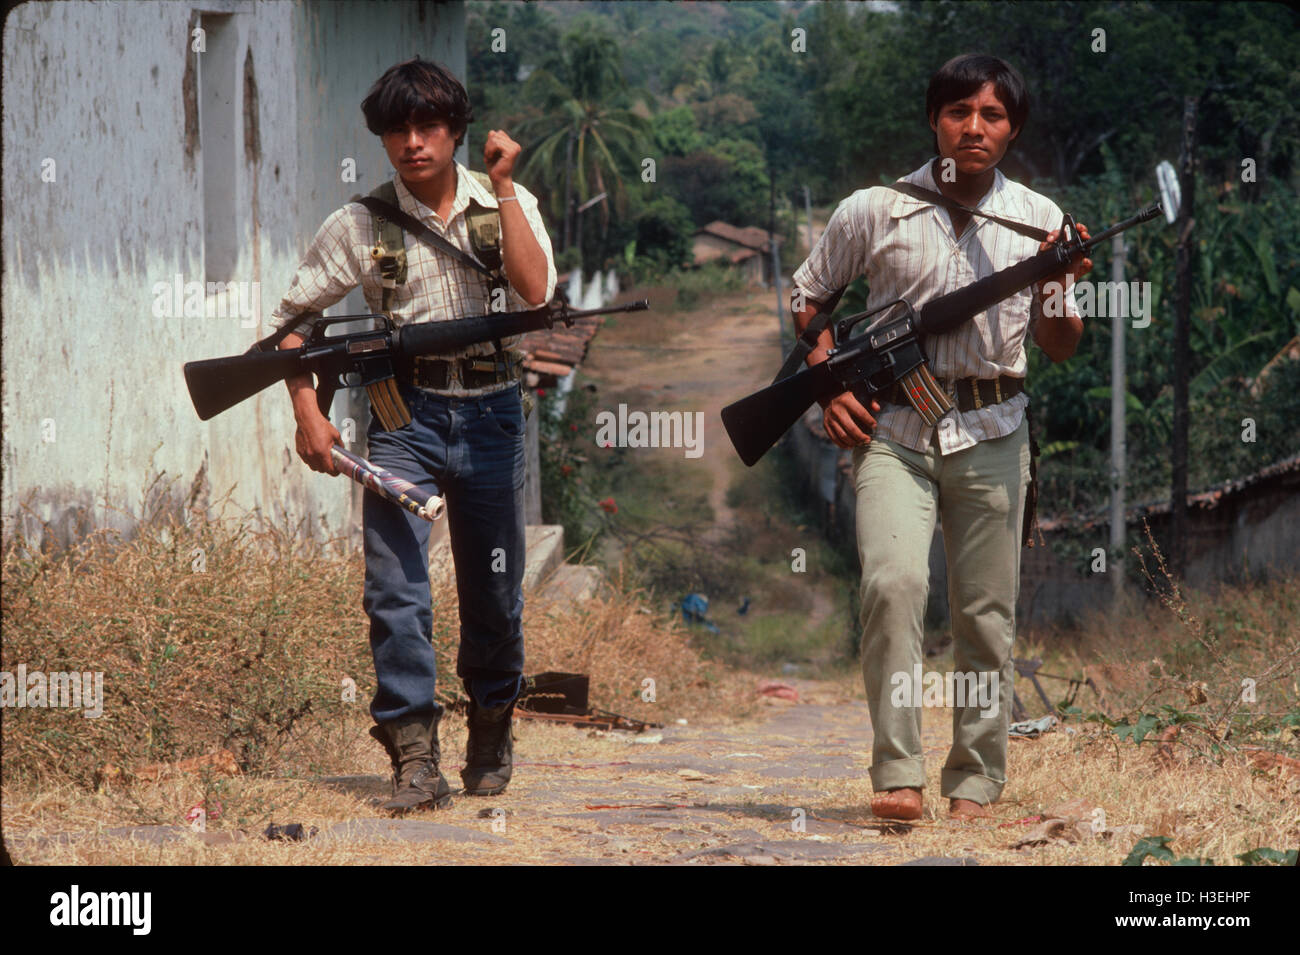 TENANCINGO,  EL SALVADOR, MARCH 1984: - Within the FPL Guerrilla's Zones of Control.  Two guerrilla fighters make their way through the abandoned streets of this contested town. Stock Photo